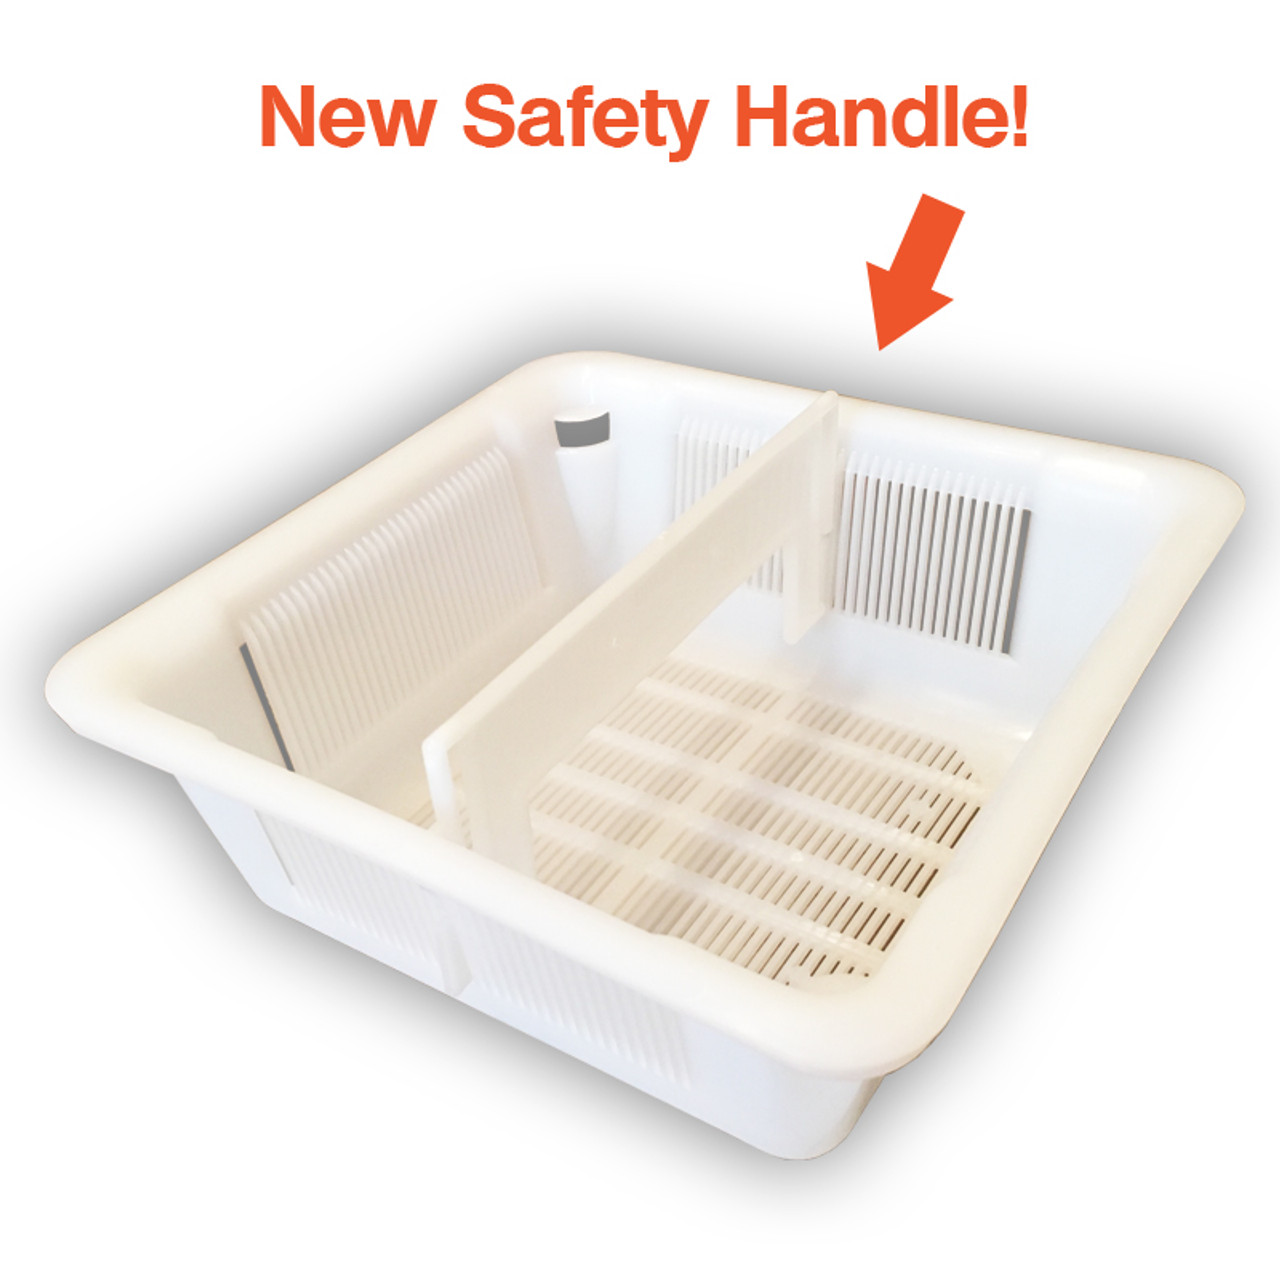 Floor Sink Basket with Safety Handle - 8.5 inch Square